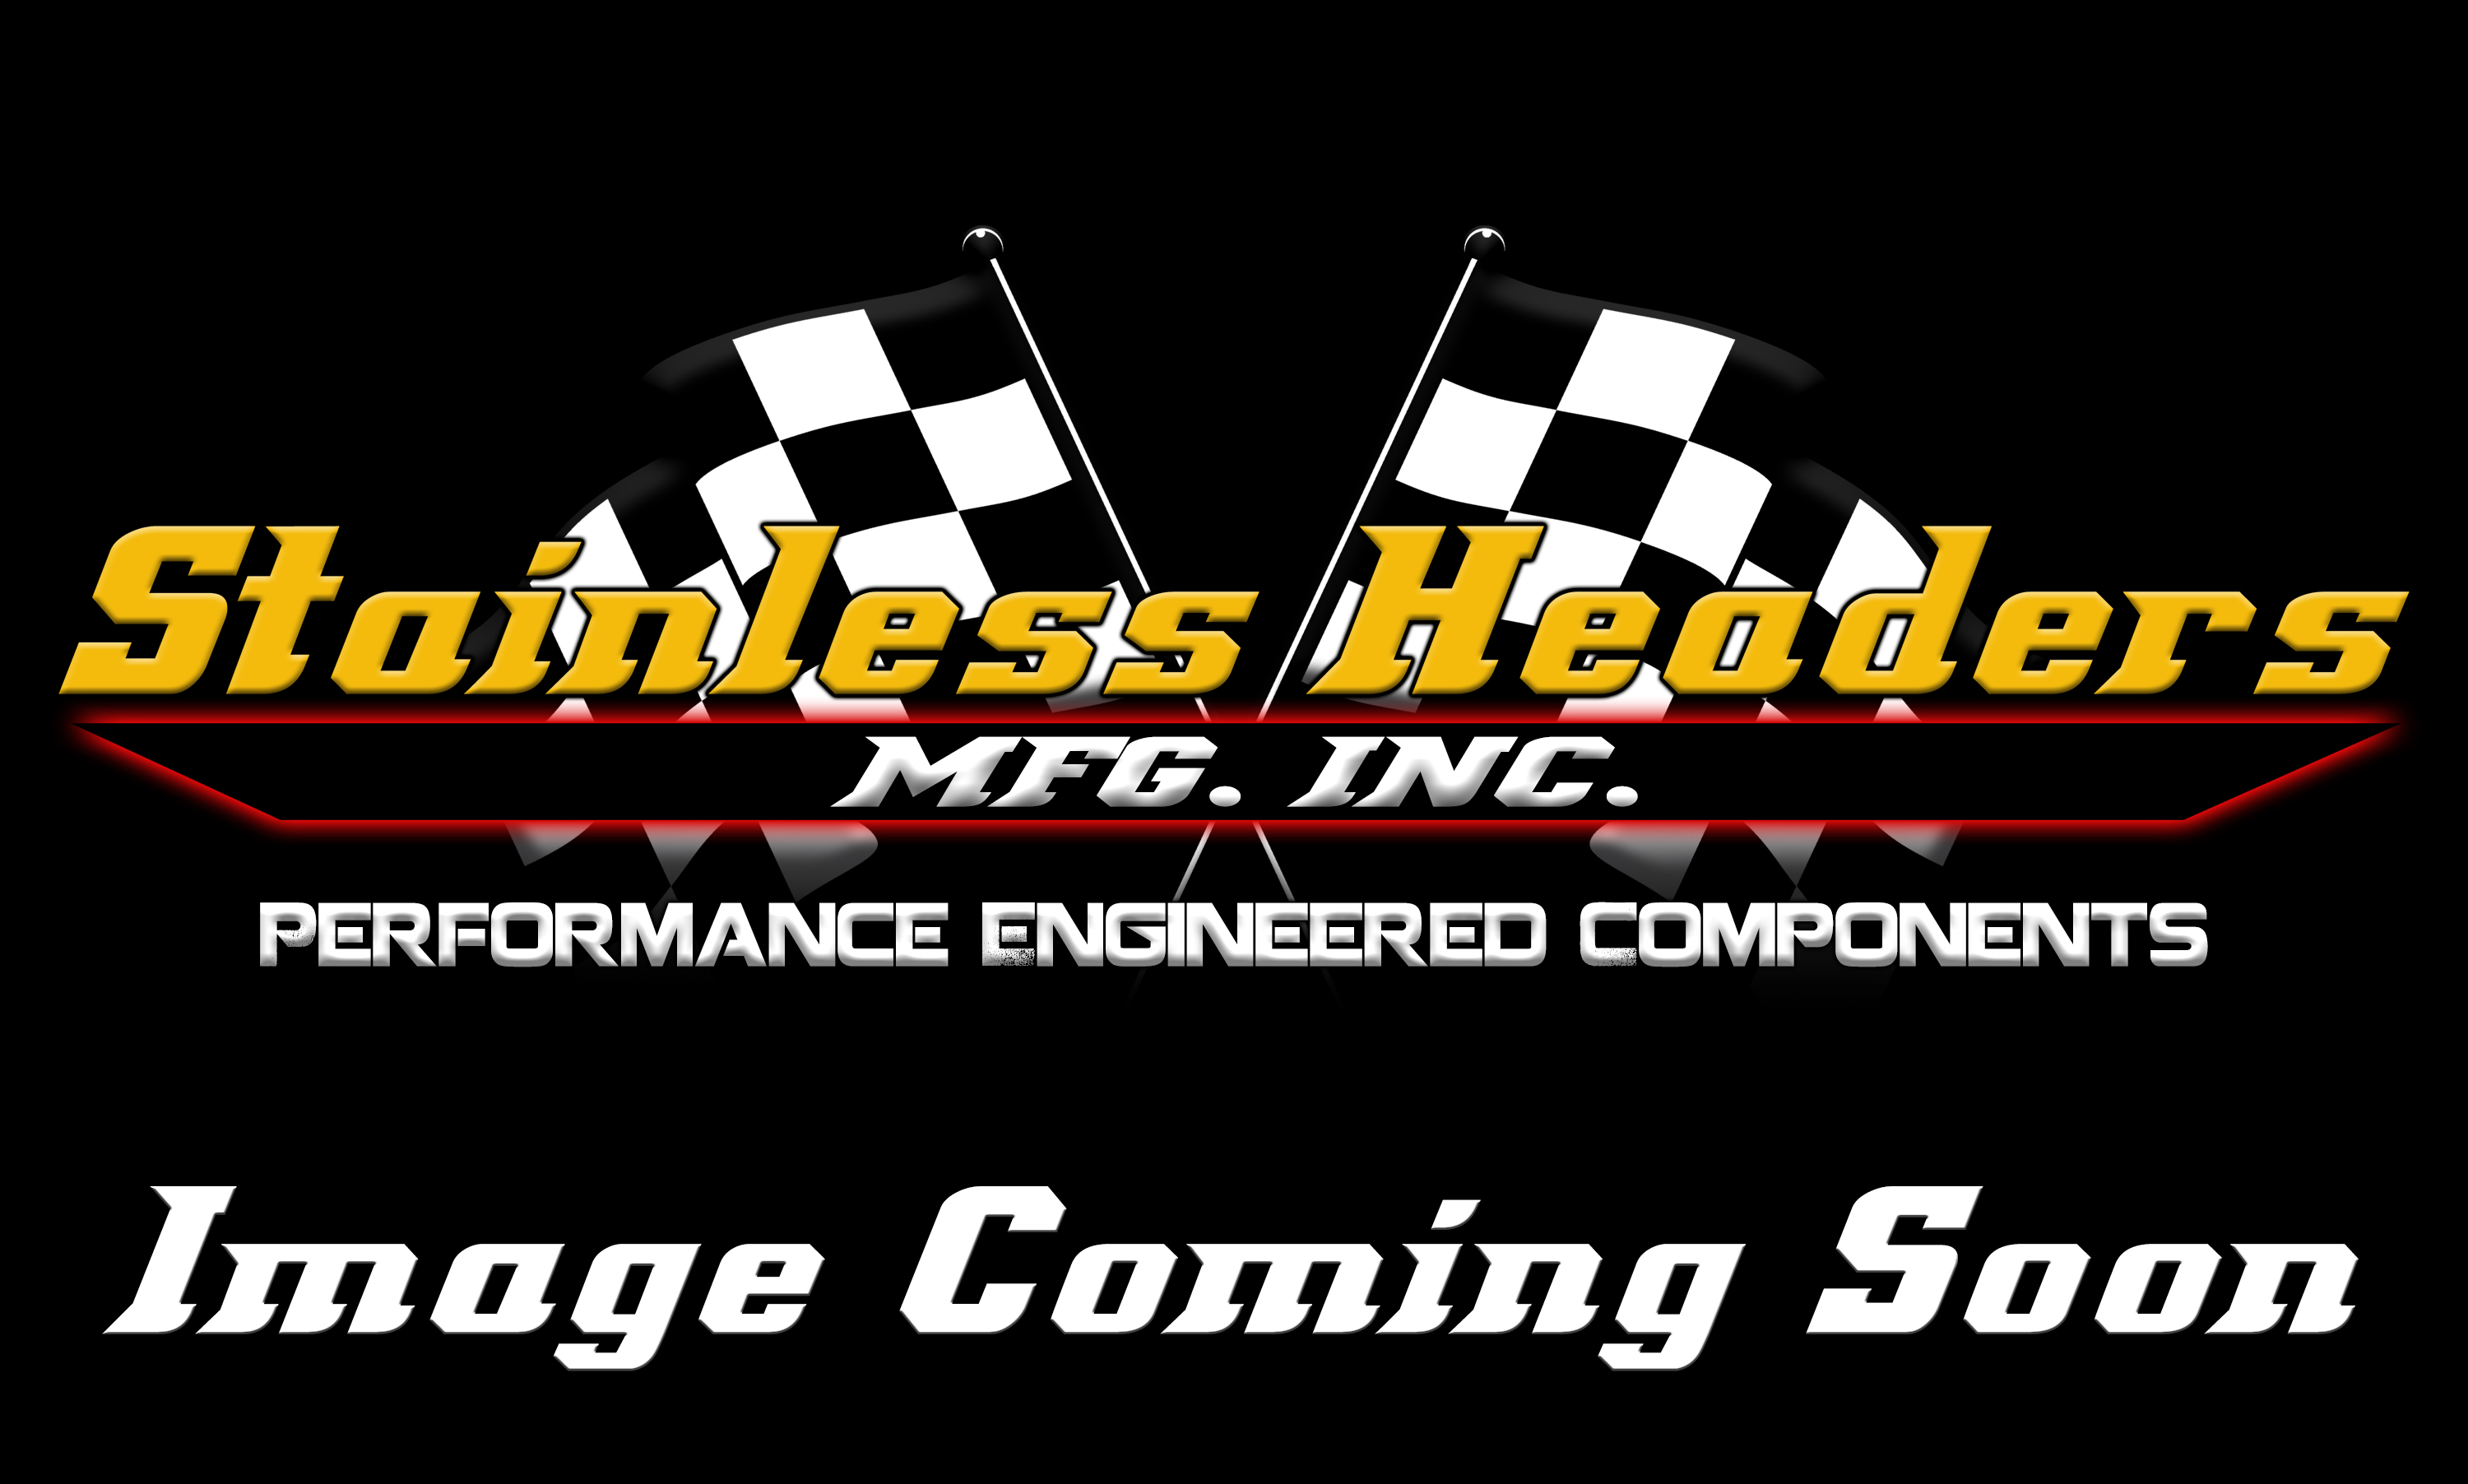 CompTurbo Technologies - CTR4828R-8890 Mid Frame Air-Cooled 1.0  Turbocharger (1850 HP)